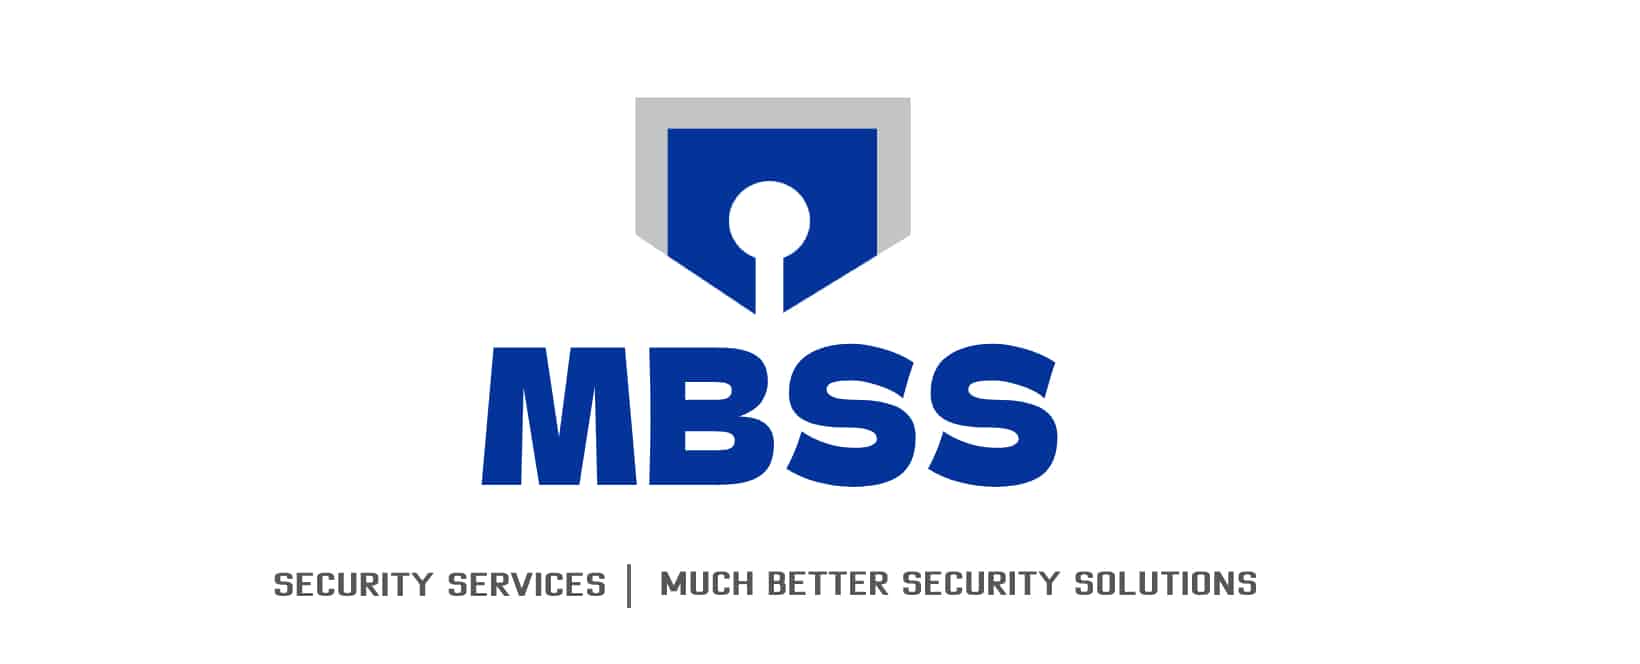 MBSS Security Services